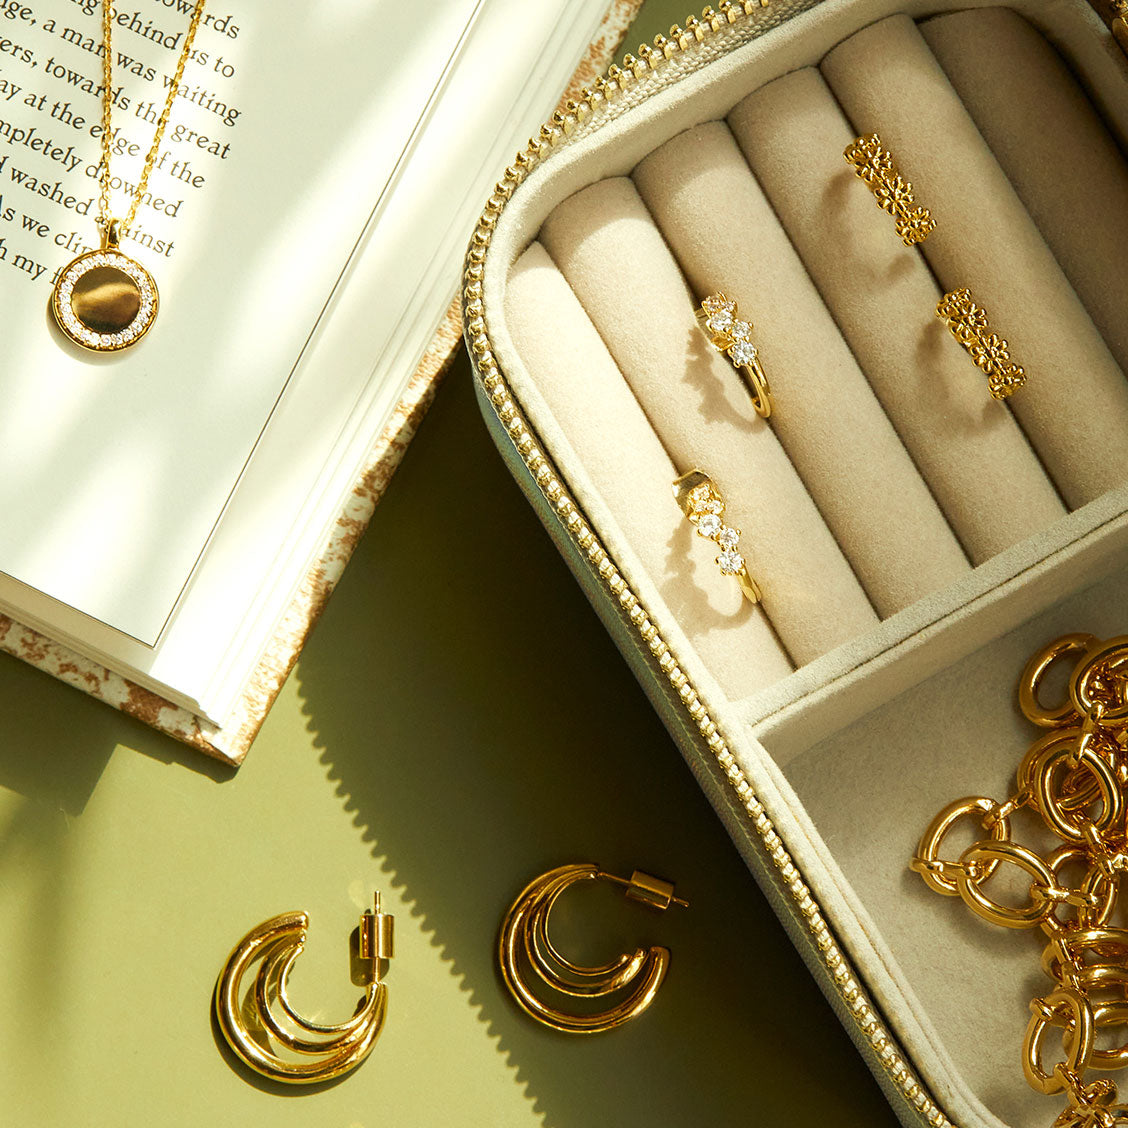 How To Mix Silver And Gold Jewellery – Estella Bartlett